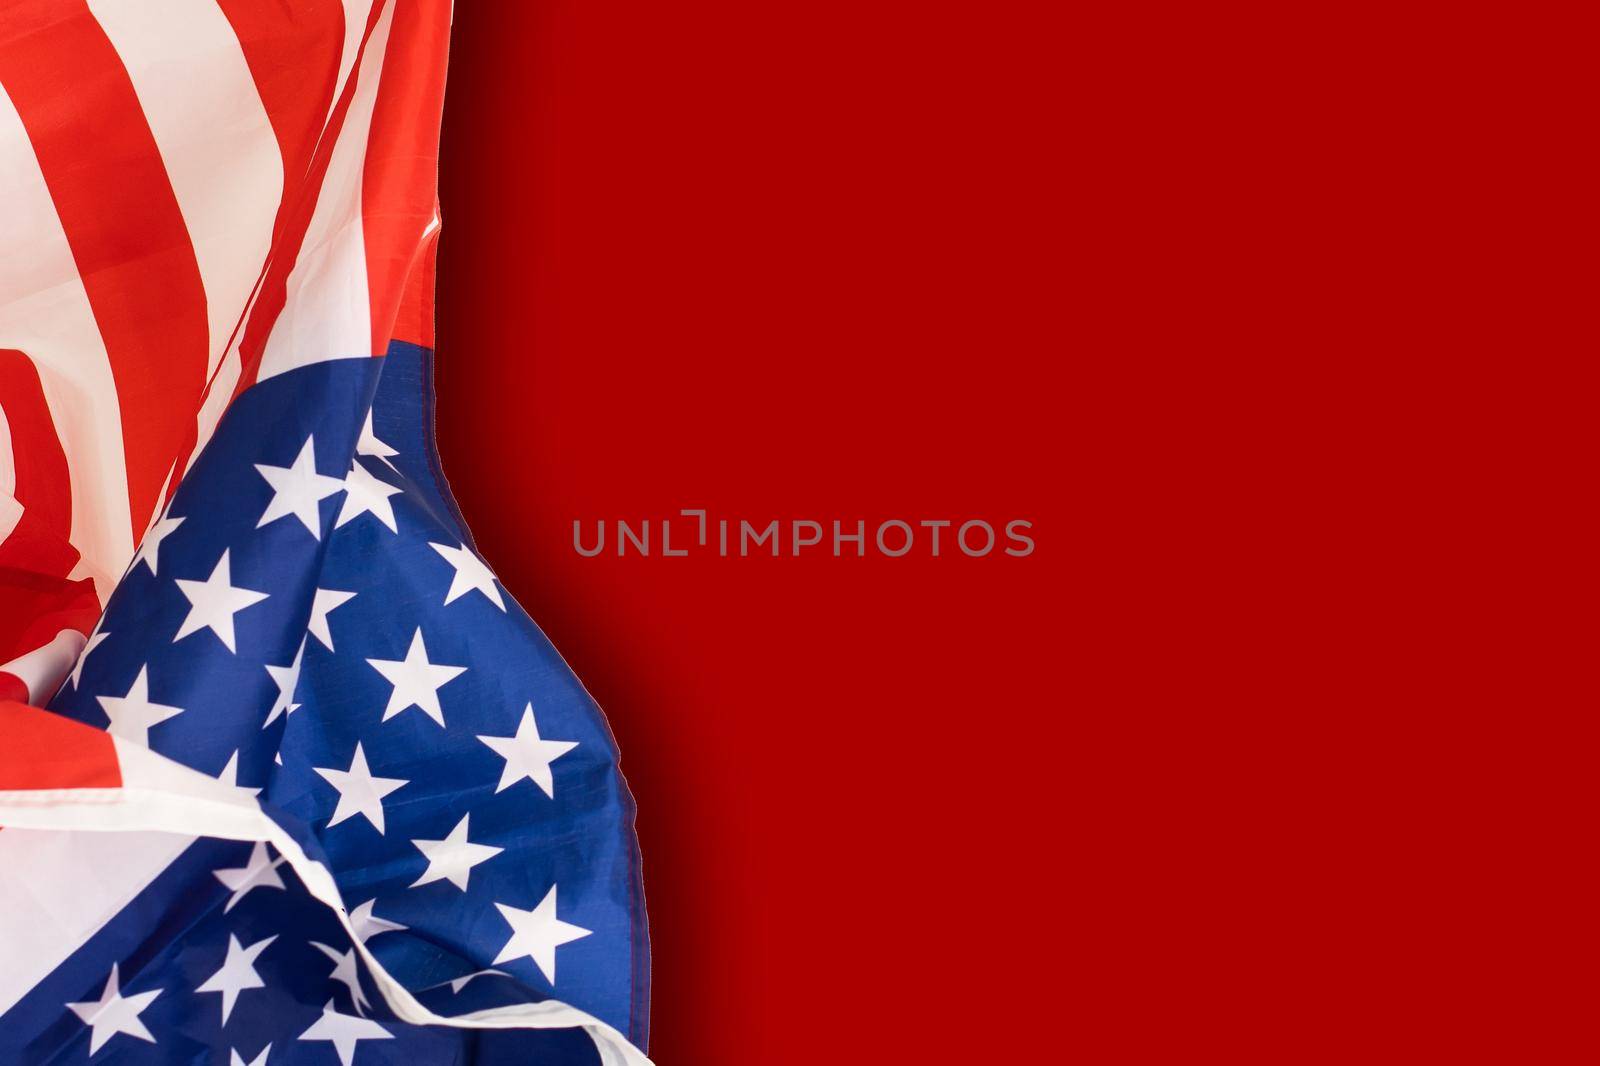 fragment of the flag of the United States on a red background.